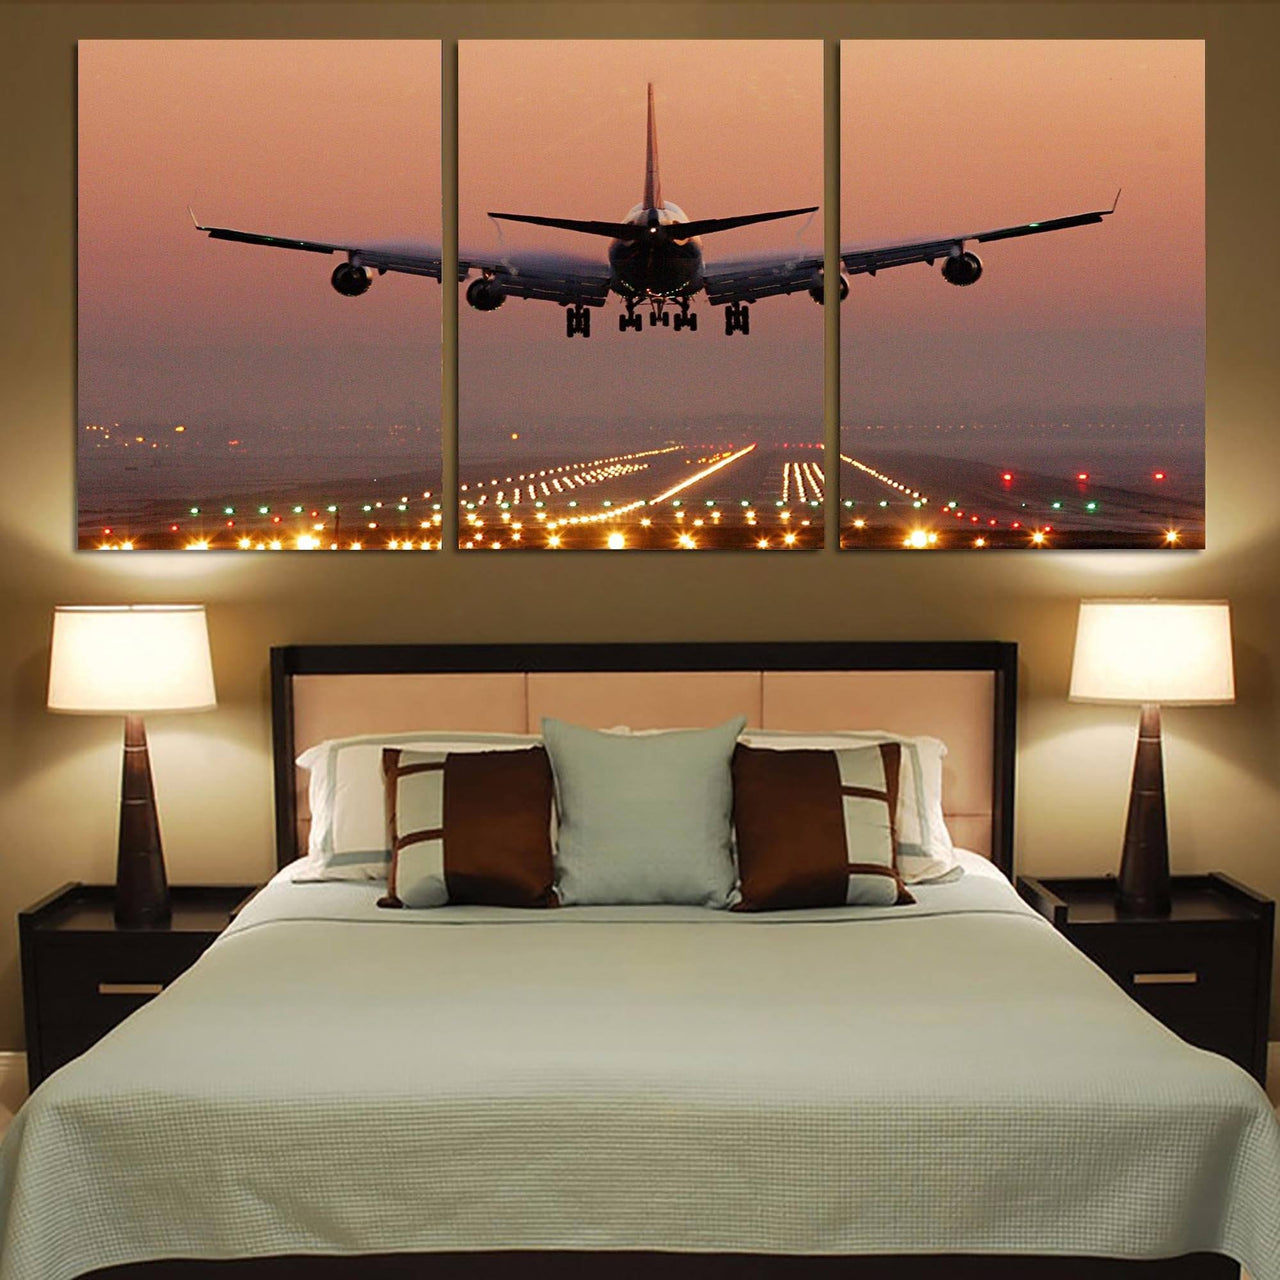 Landing Boeing 747 During Sunset Printed Canvas Posters (3 Pieces) Aviation Shop 